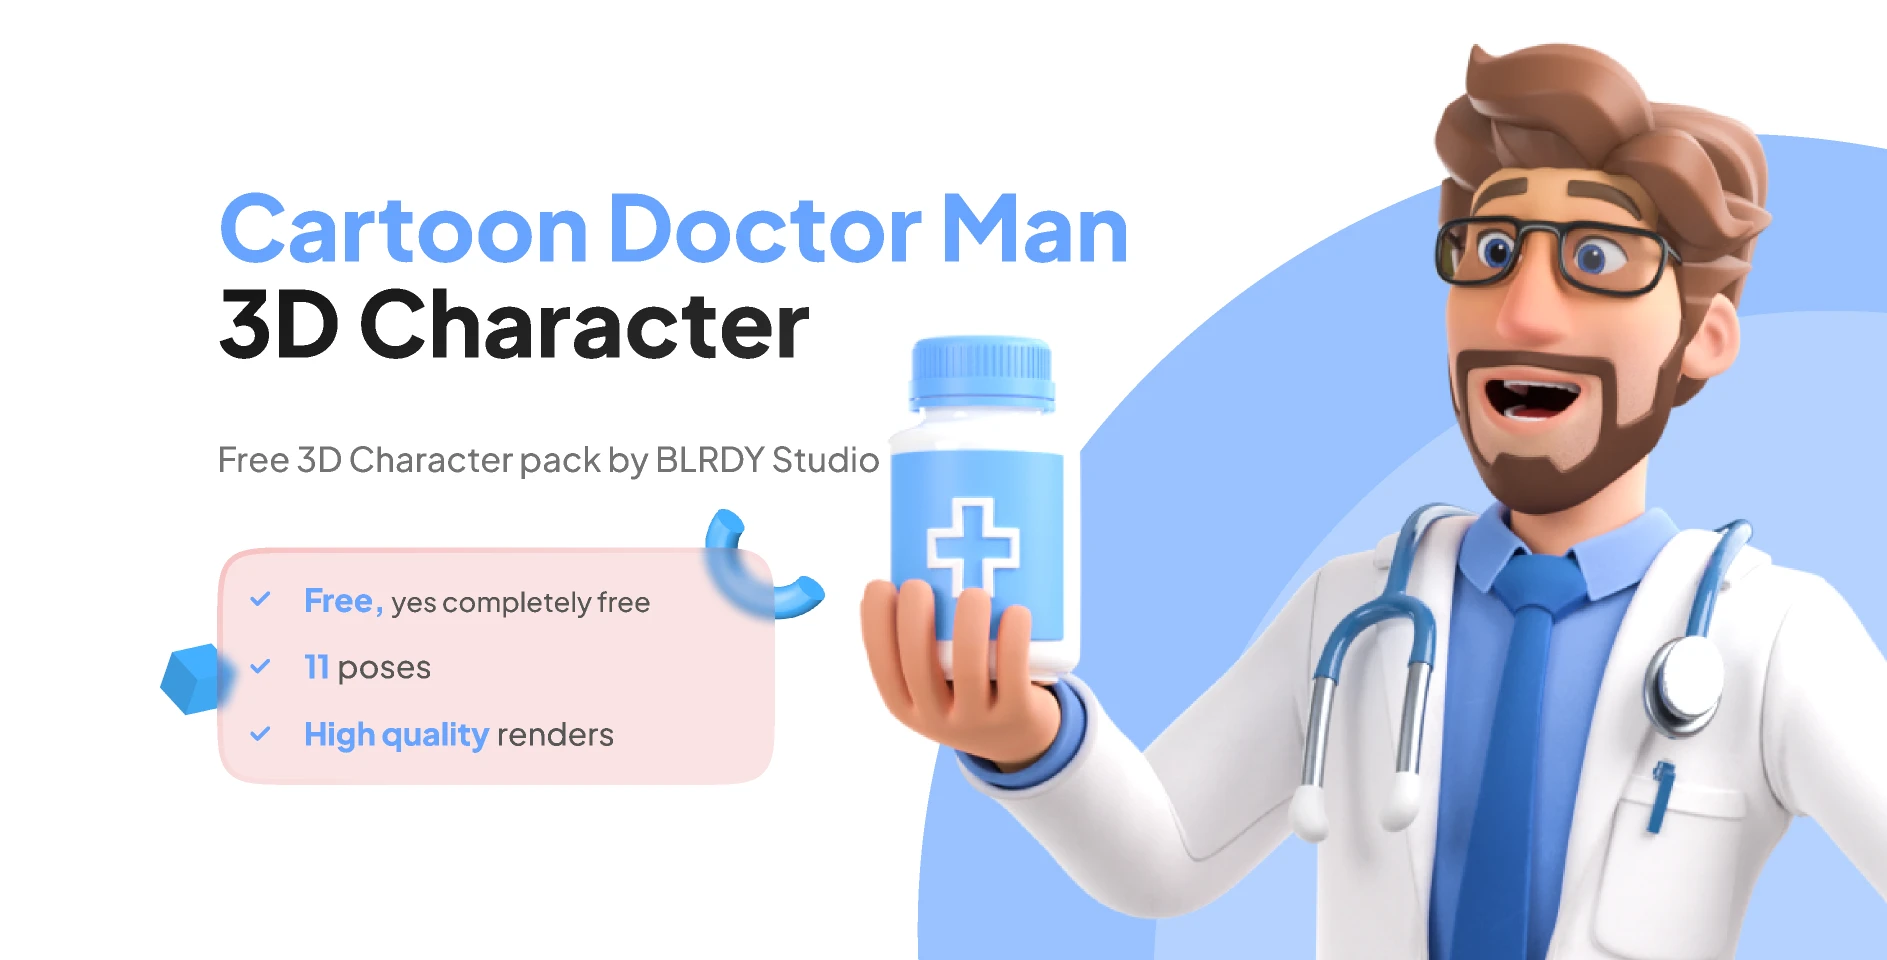 3D Cartoon Doctor Man for Figma and Adobe XD